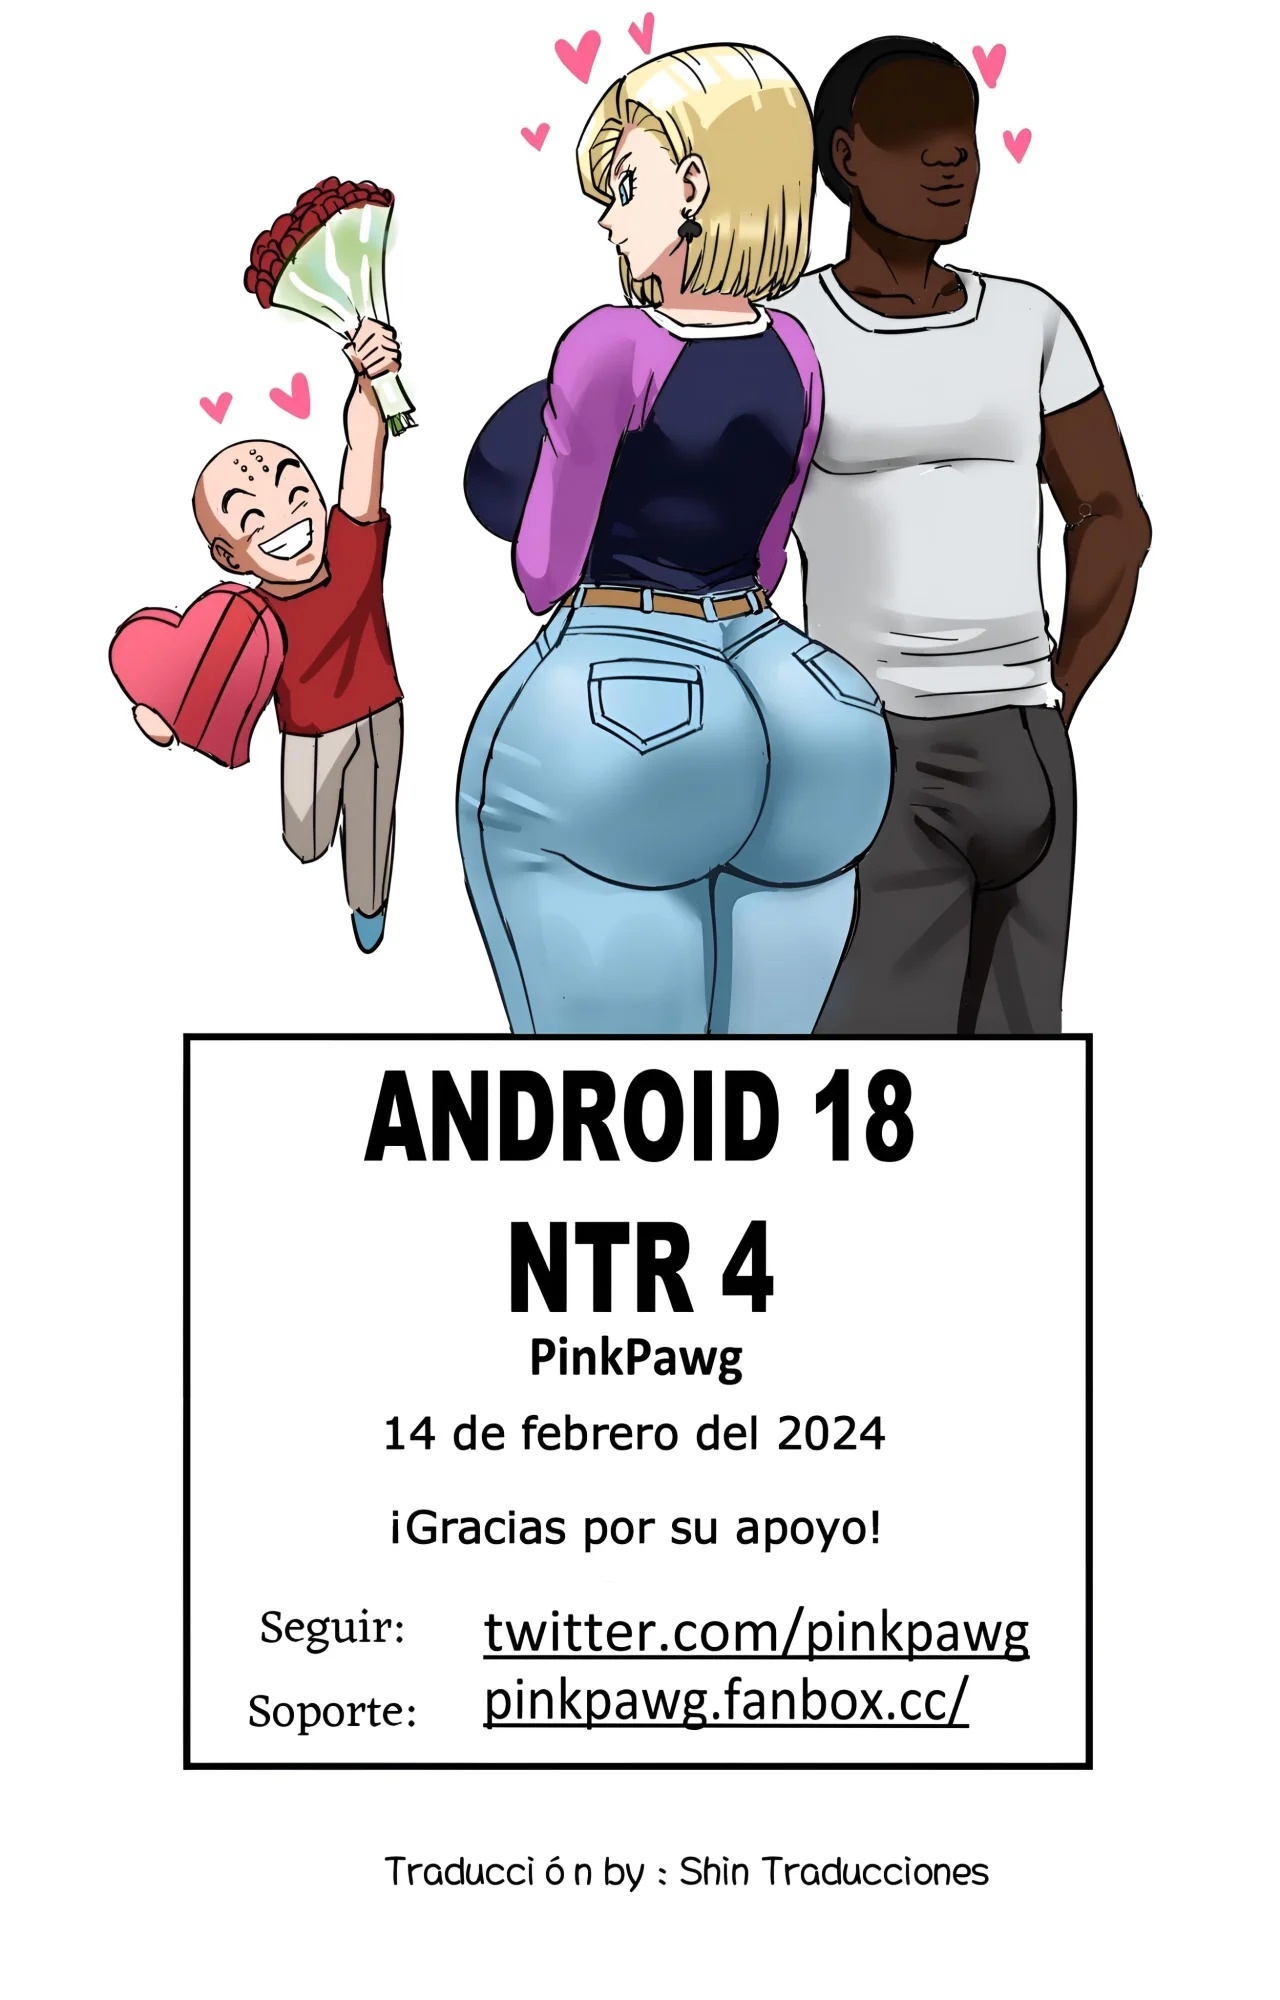 Android 18 NTR 4 Pinkpawg - 24